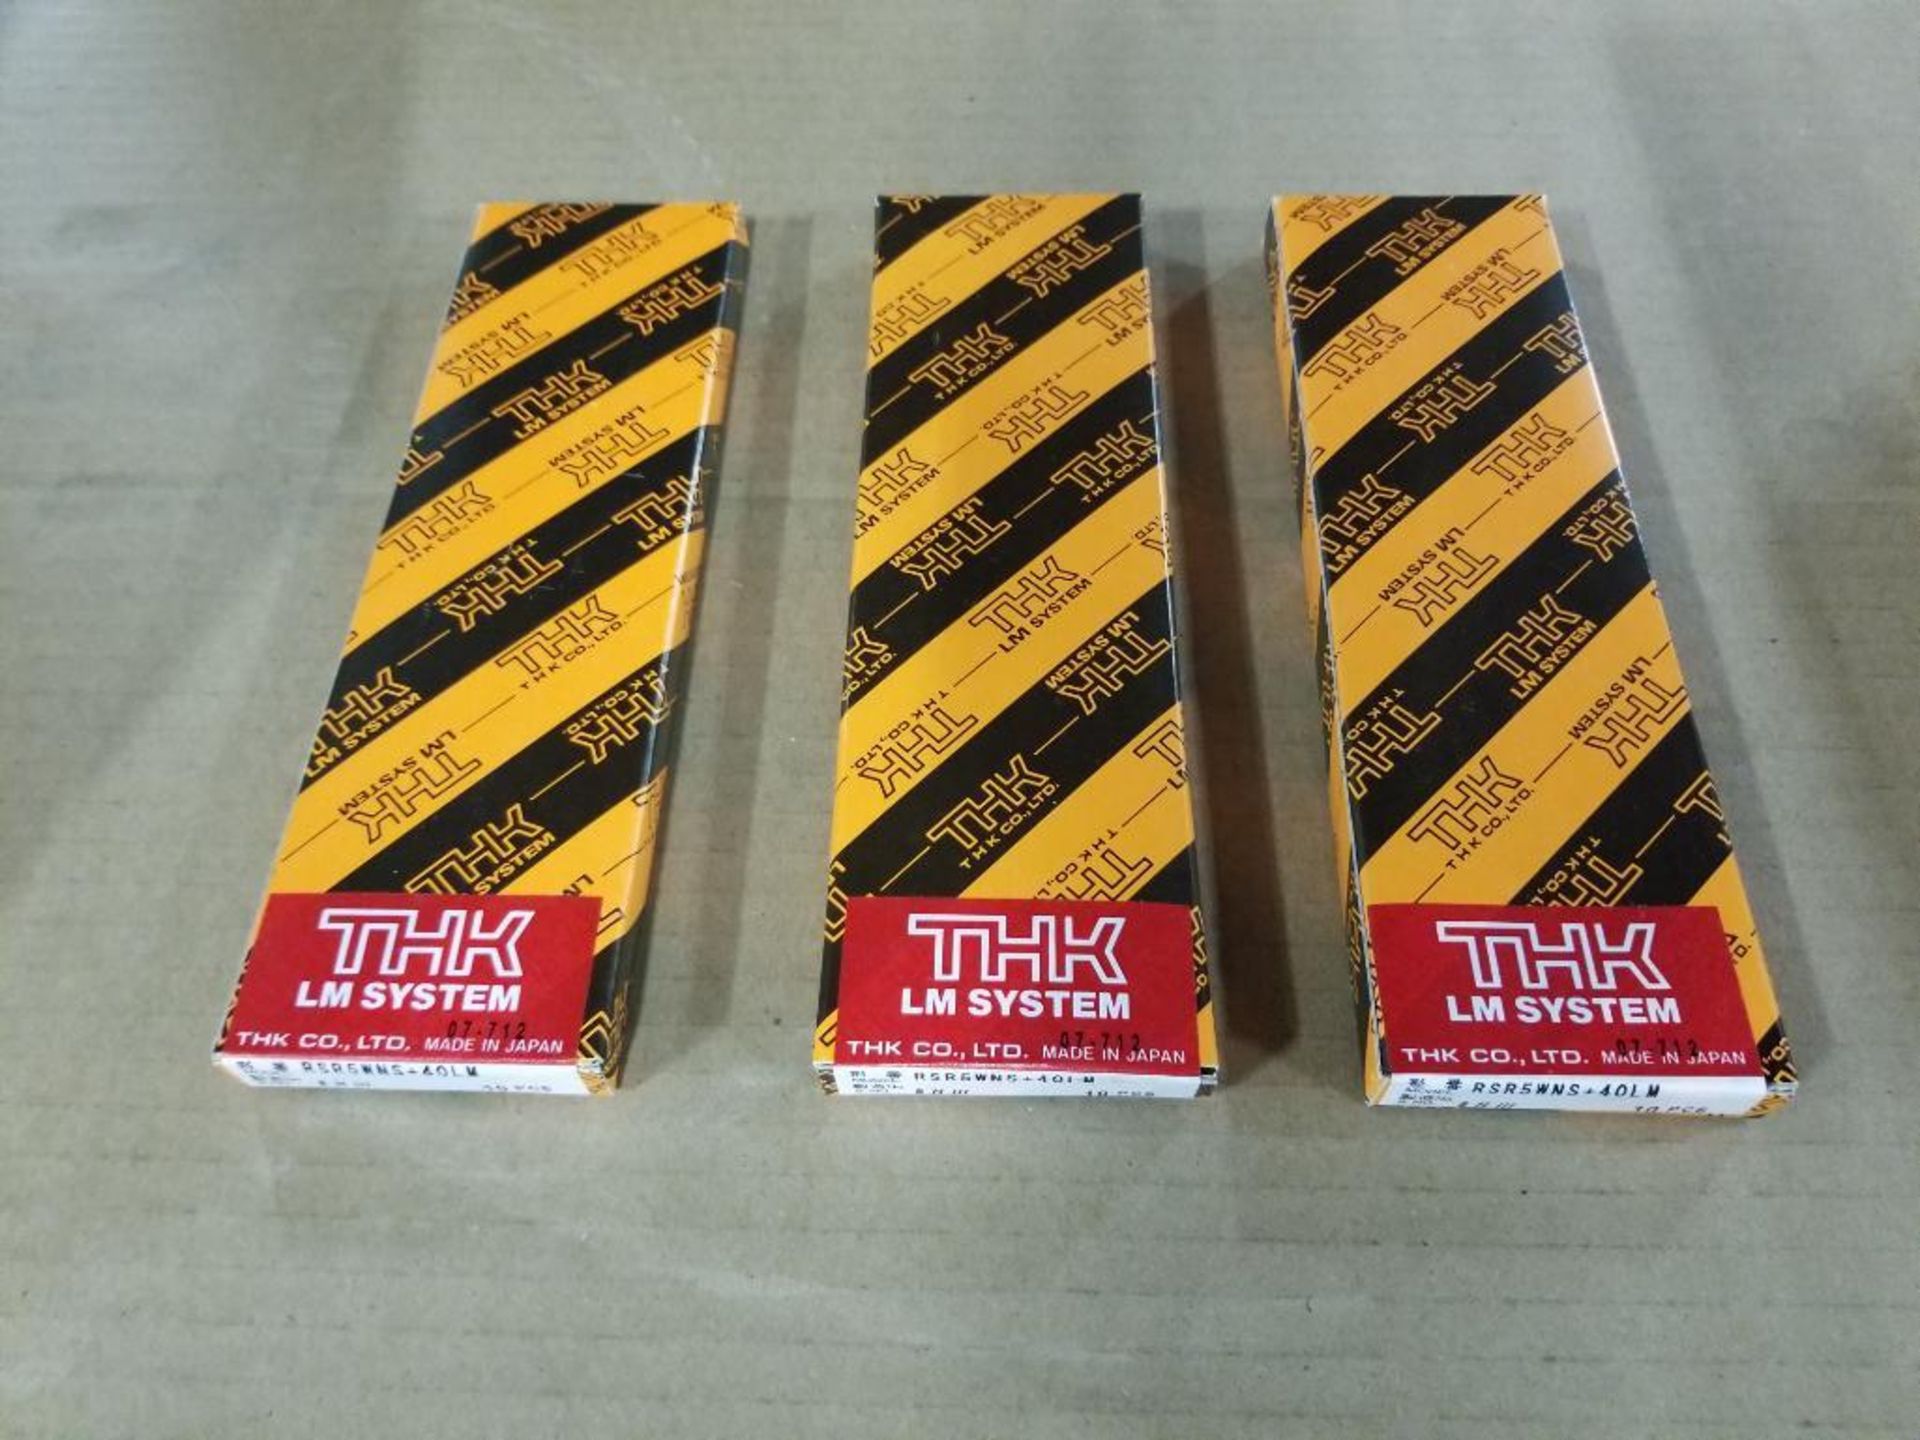 Qty 3 - Box of THK Linear slide. RSR5WNS+40LM. 10pc each. New in box. - Image 2 of 5